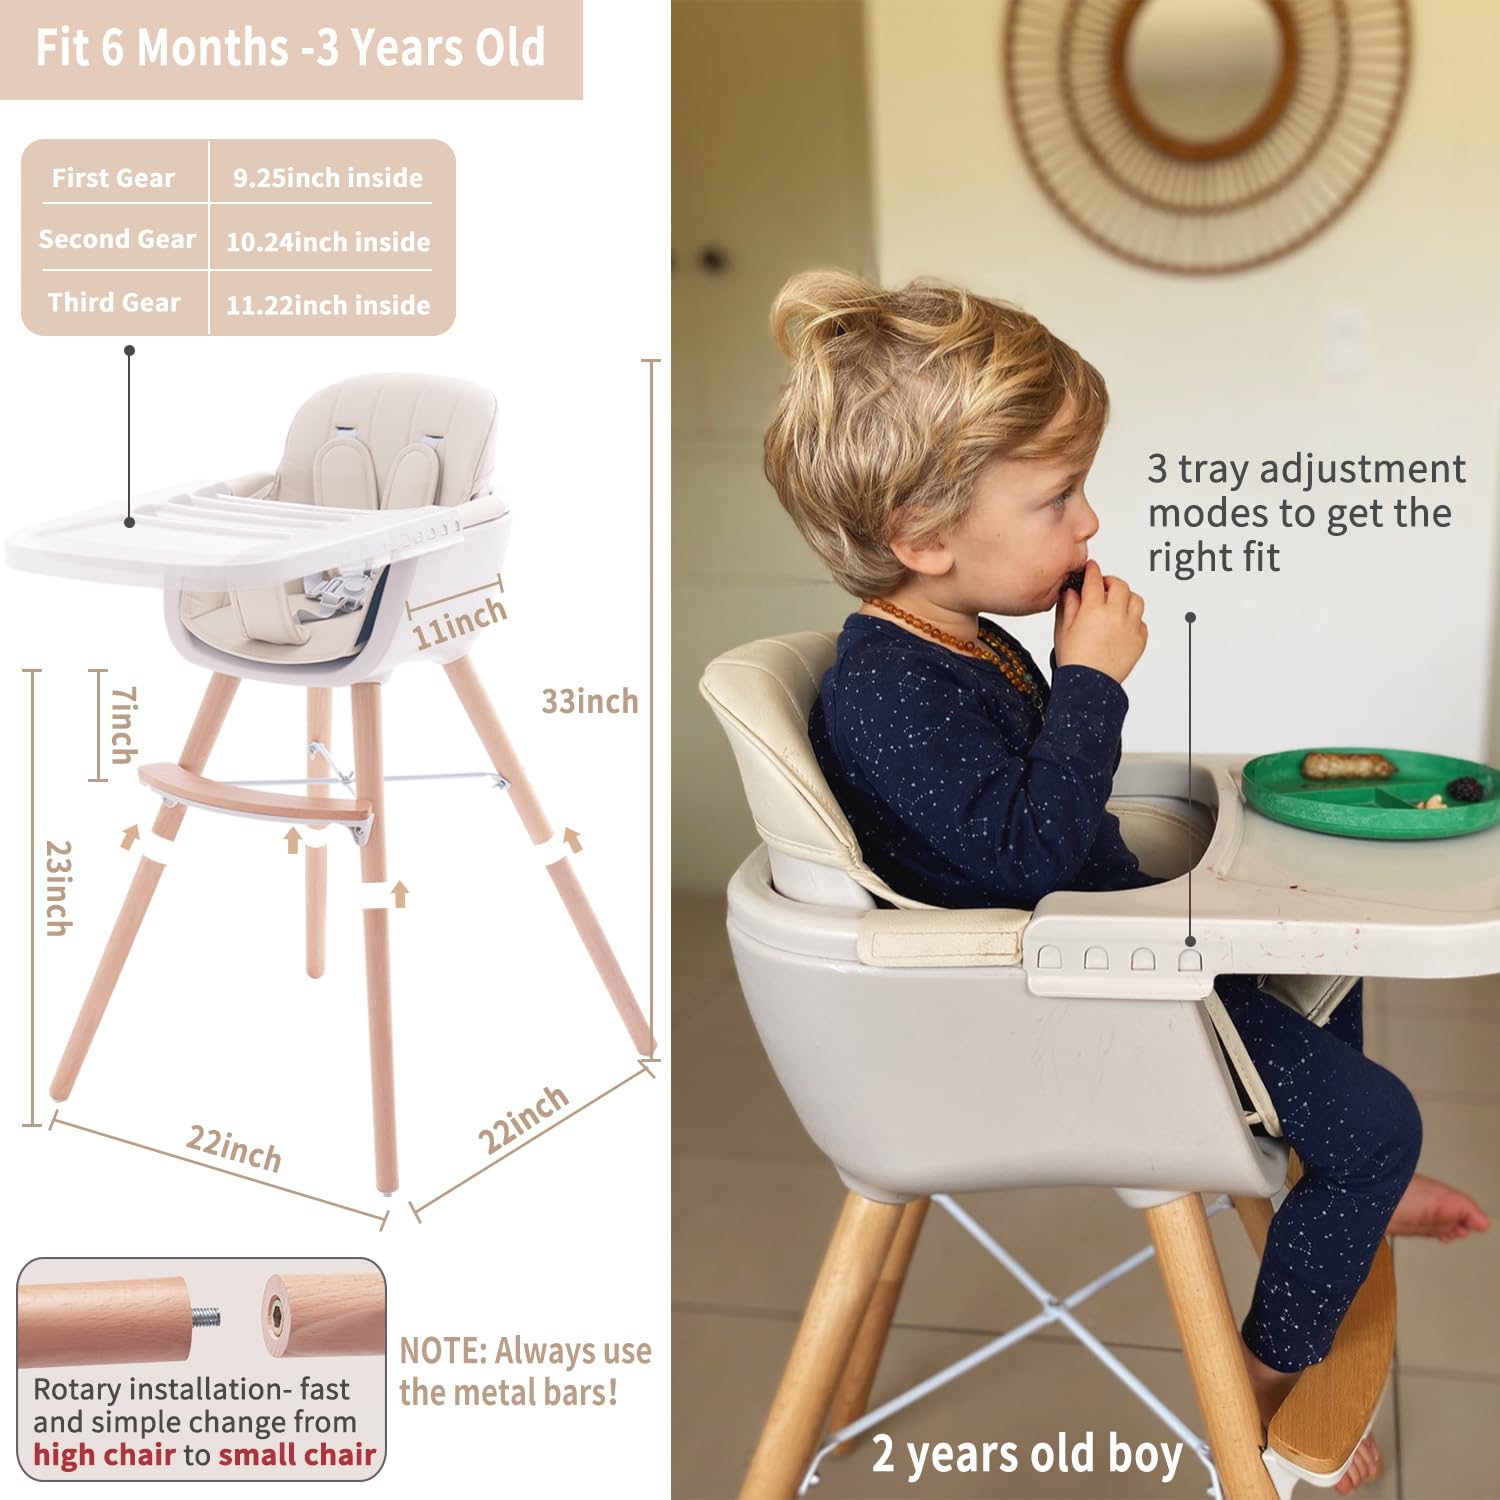 3-in-1 Convertible Wooden High Chair,Baby High Chair with Adjustable Legs & Dishwasher Safe Tray, Made of Sleek Hardwood & Premium Leatherette, Cream Color